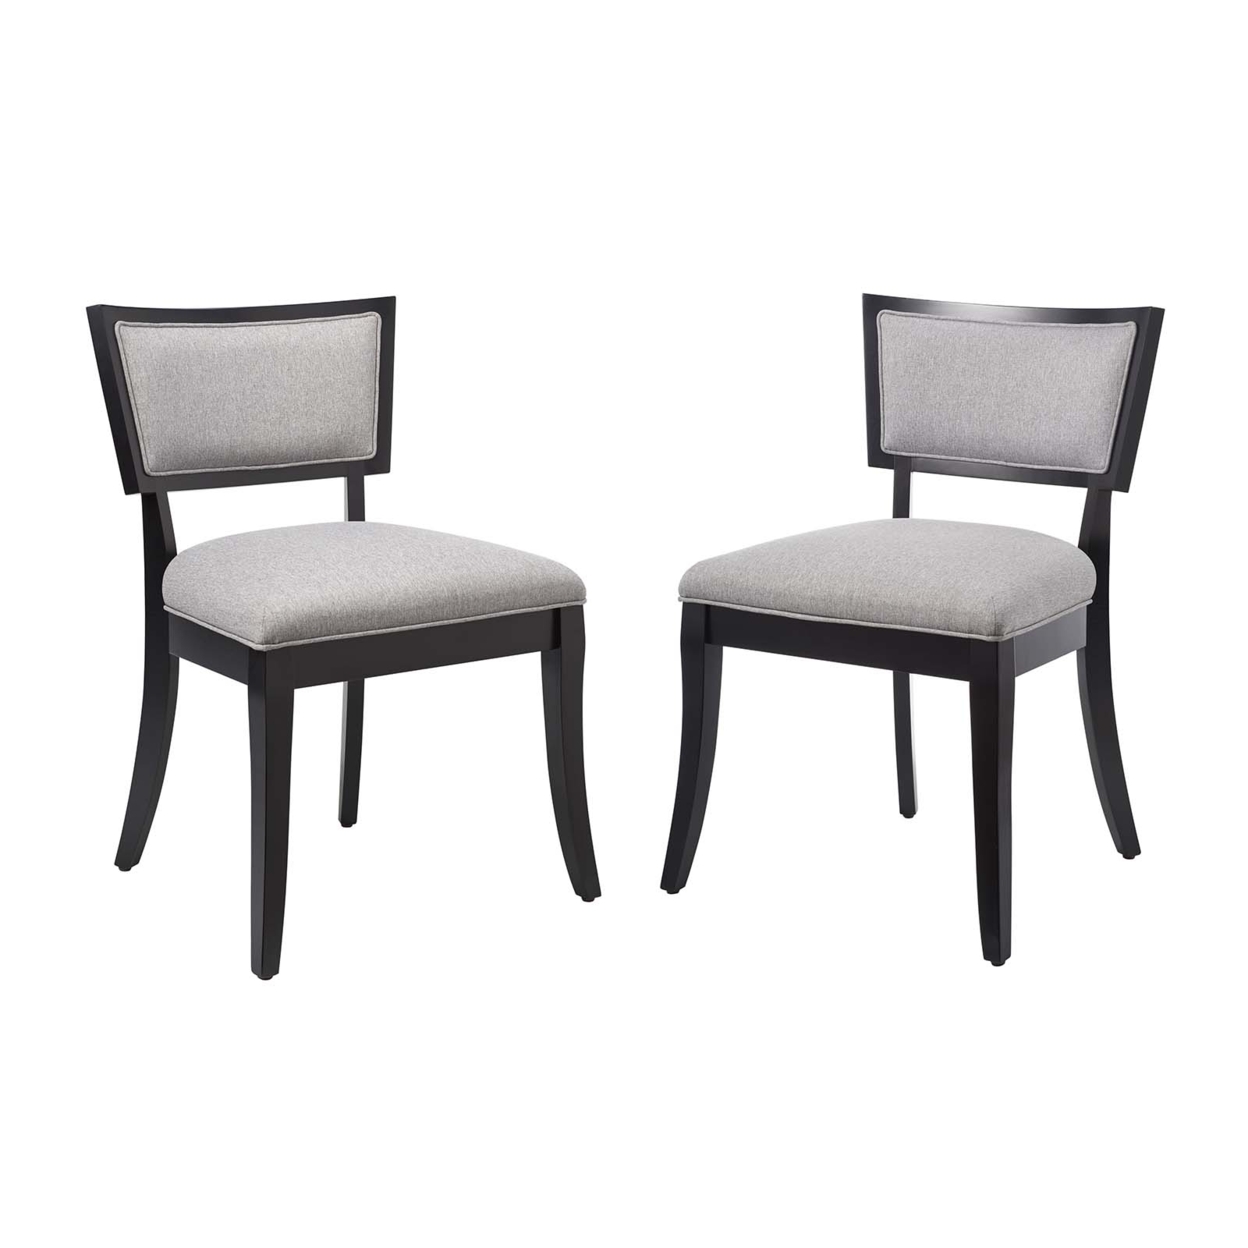 Pristine Upholstered Fabric Dining Chairs - Set Of 2, Light Gray